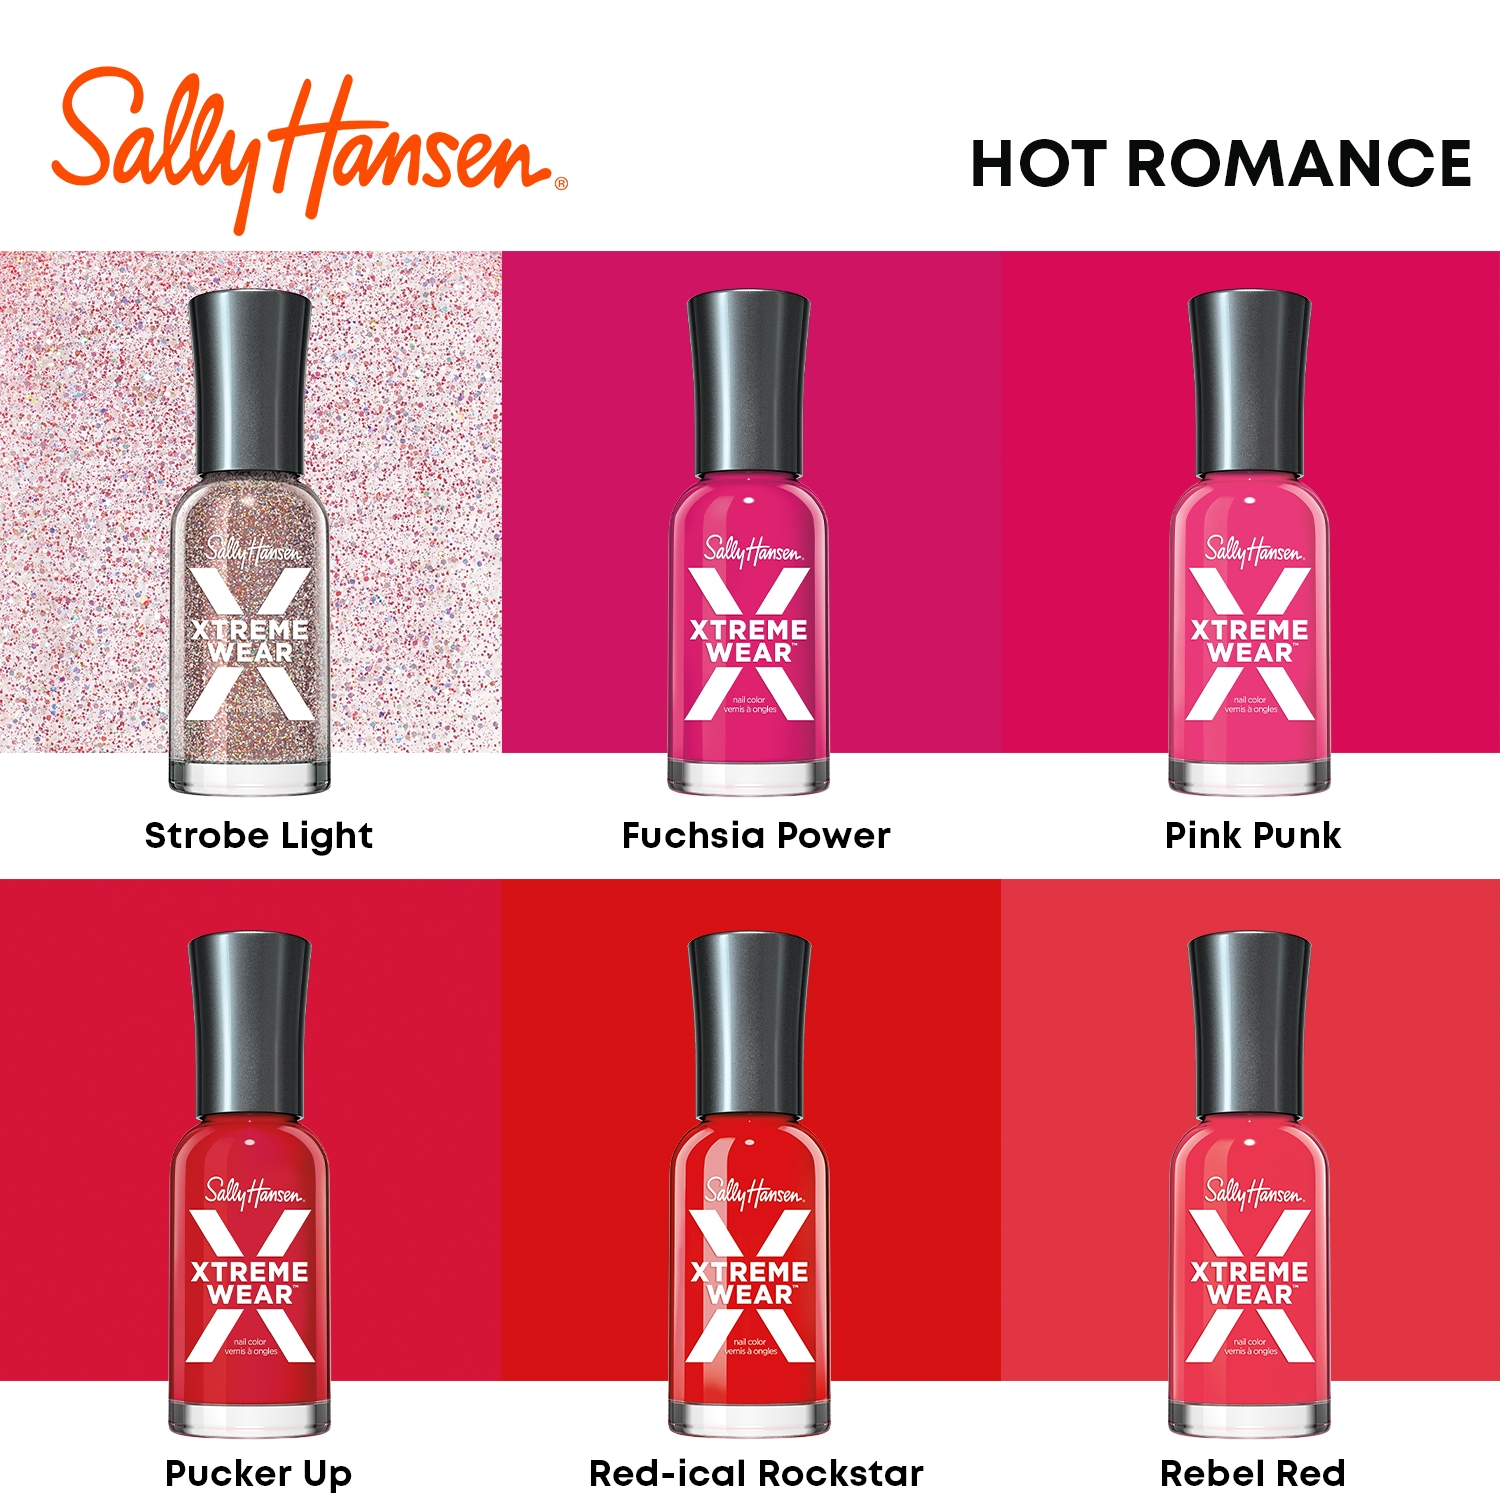 sally hansen xtreme wear nail color 302 red-ical rockstar (pack of 4)4 - image 6 of 14